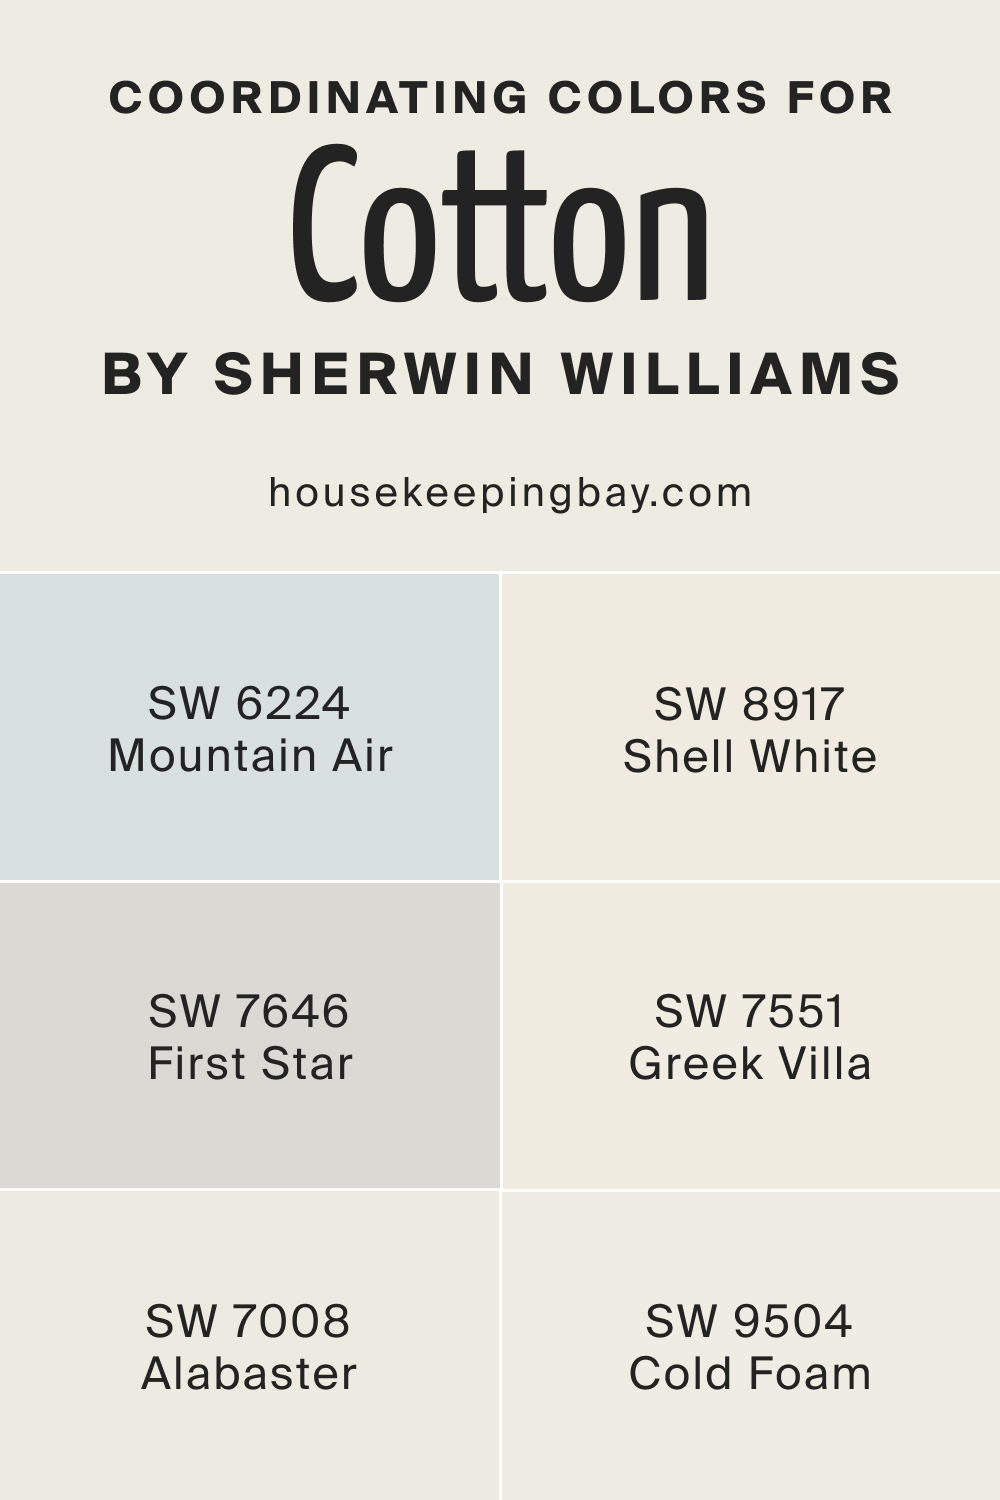 Coordinating Colors for SW 9581 Cotton by Sherwin Williams